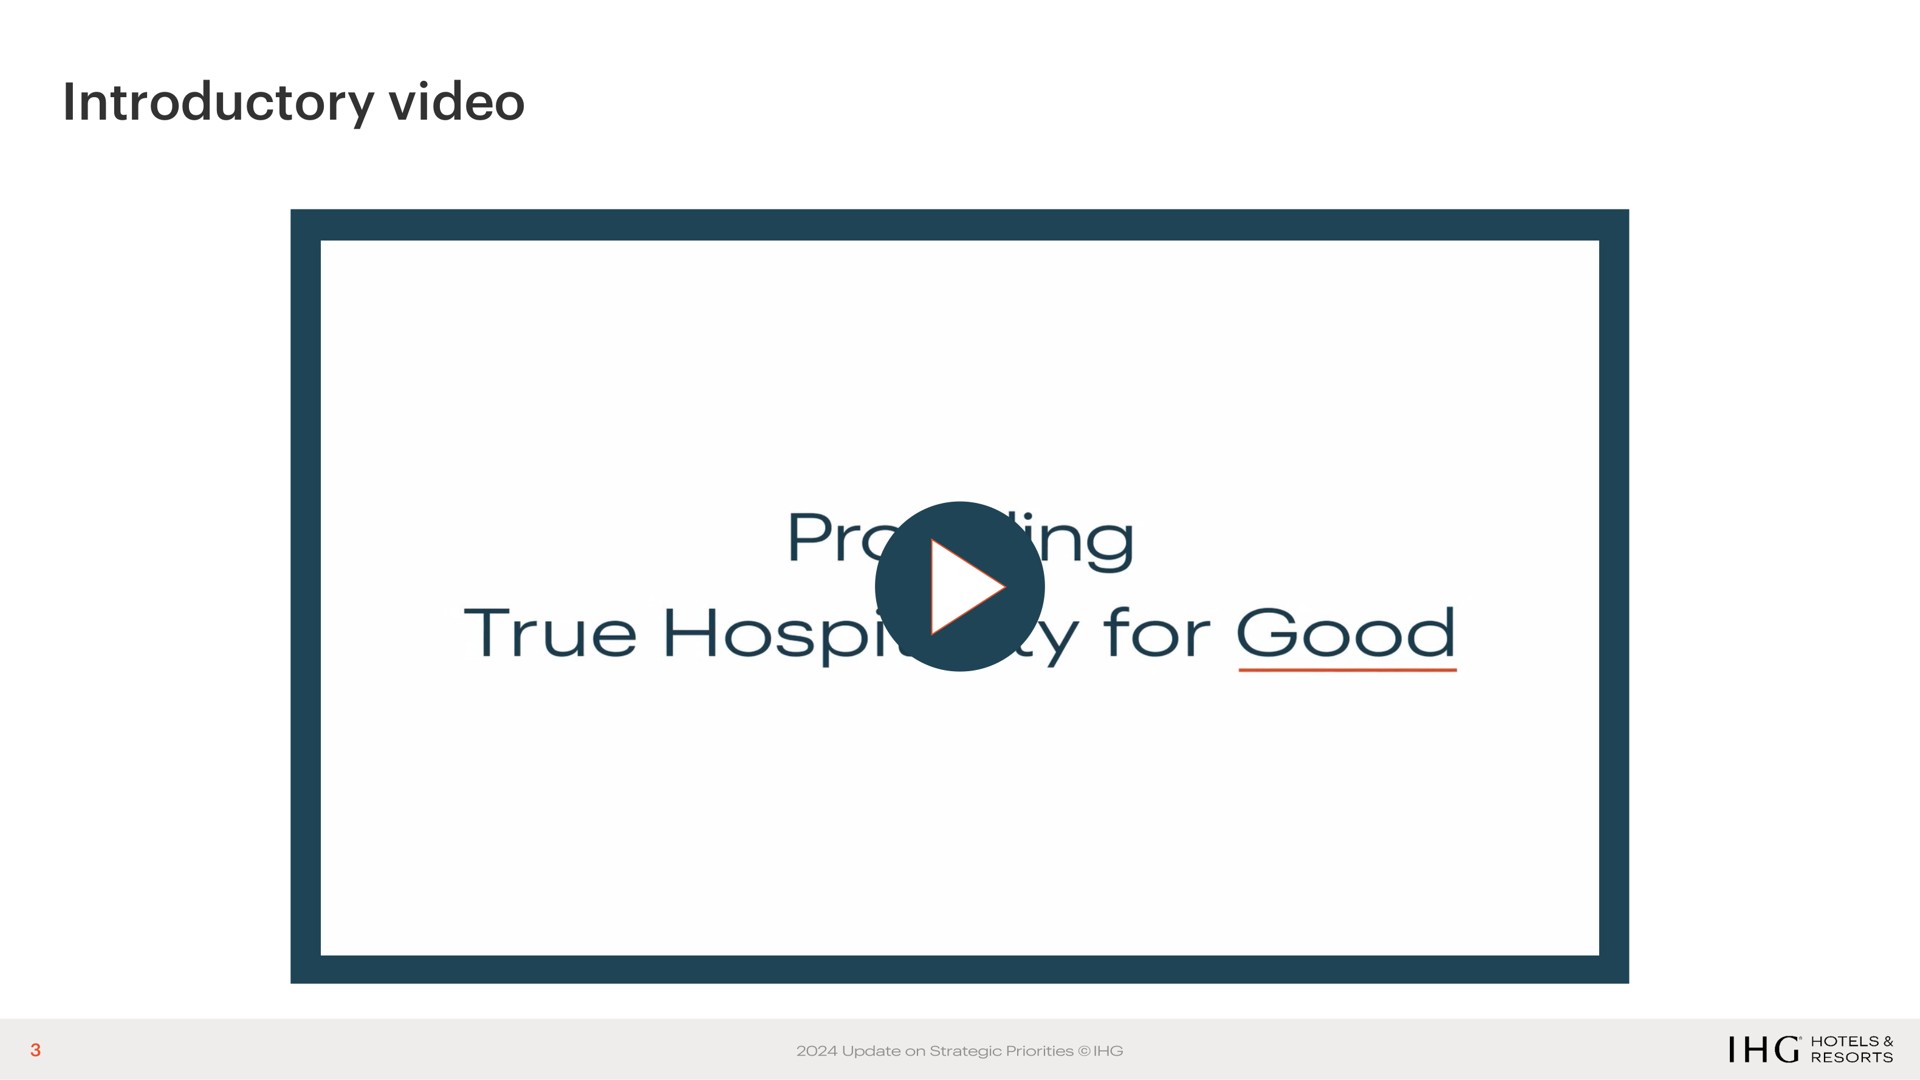 introductory video ing true for good | IHG Hotels